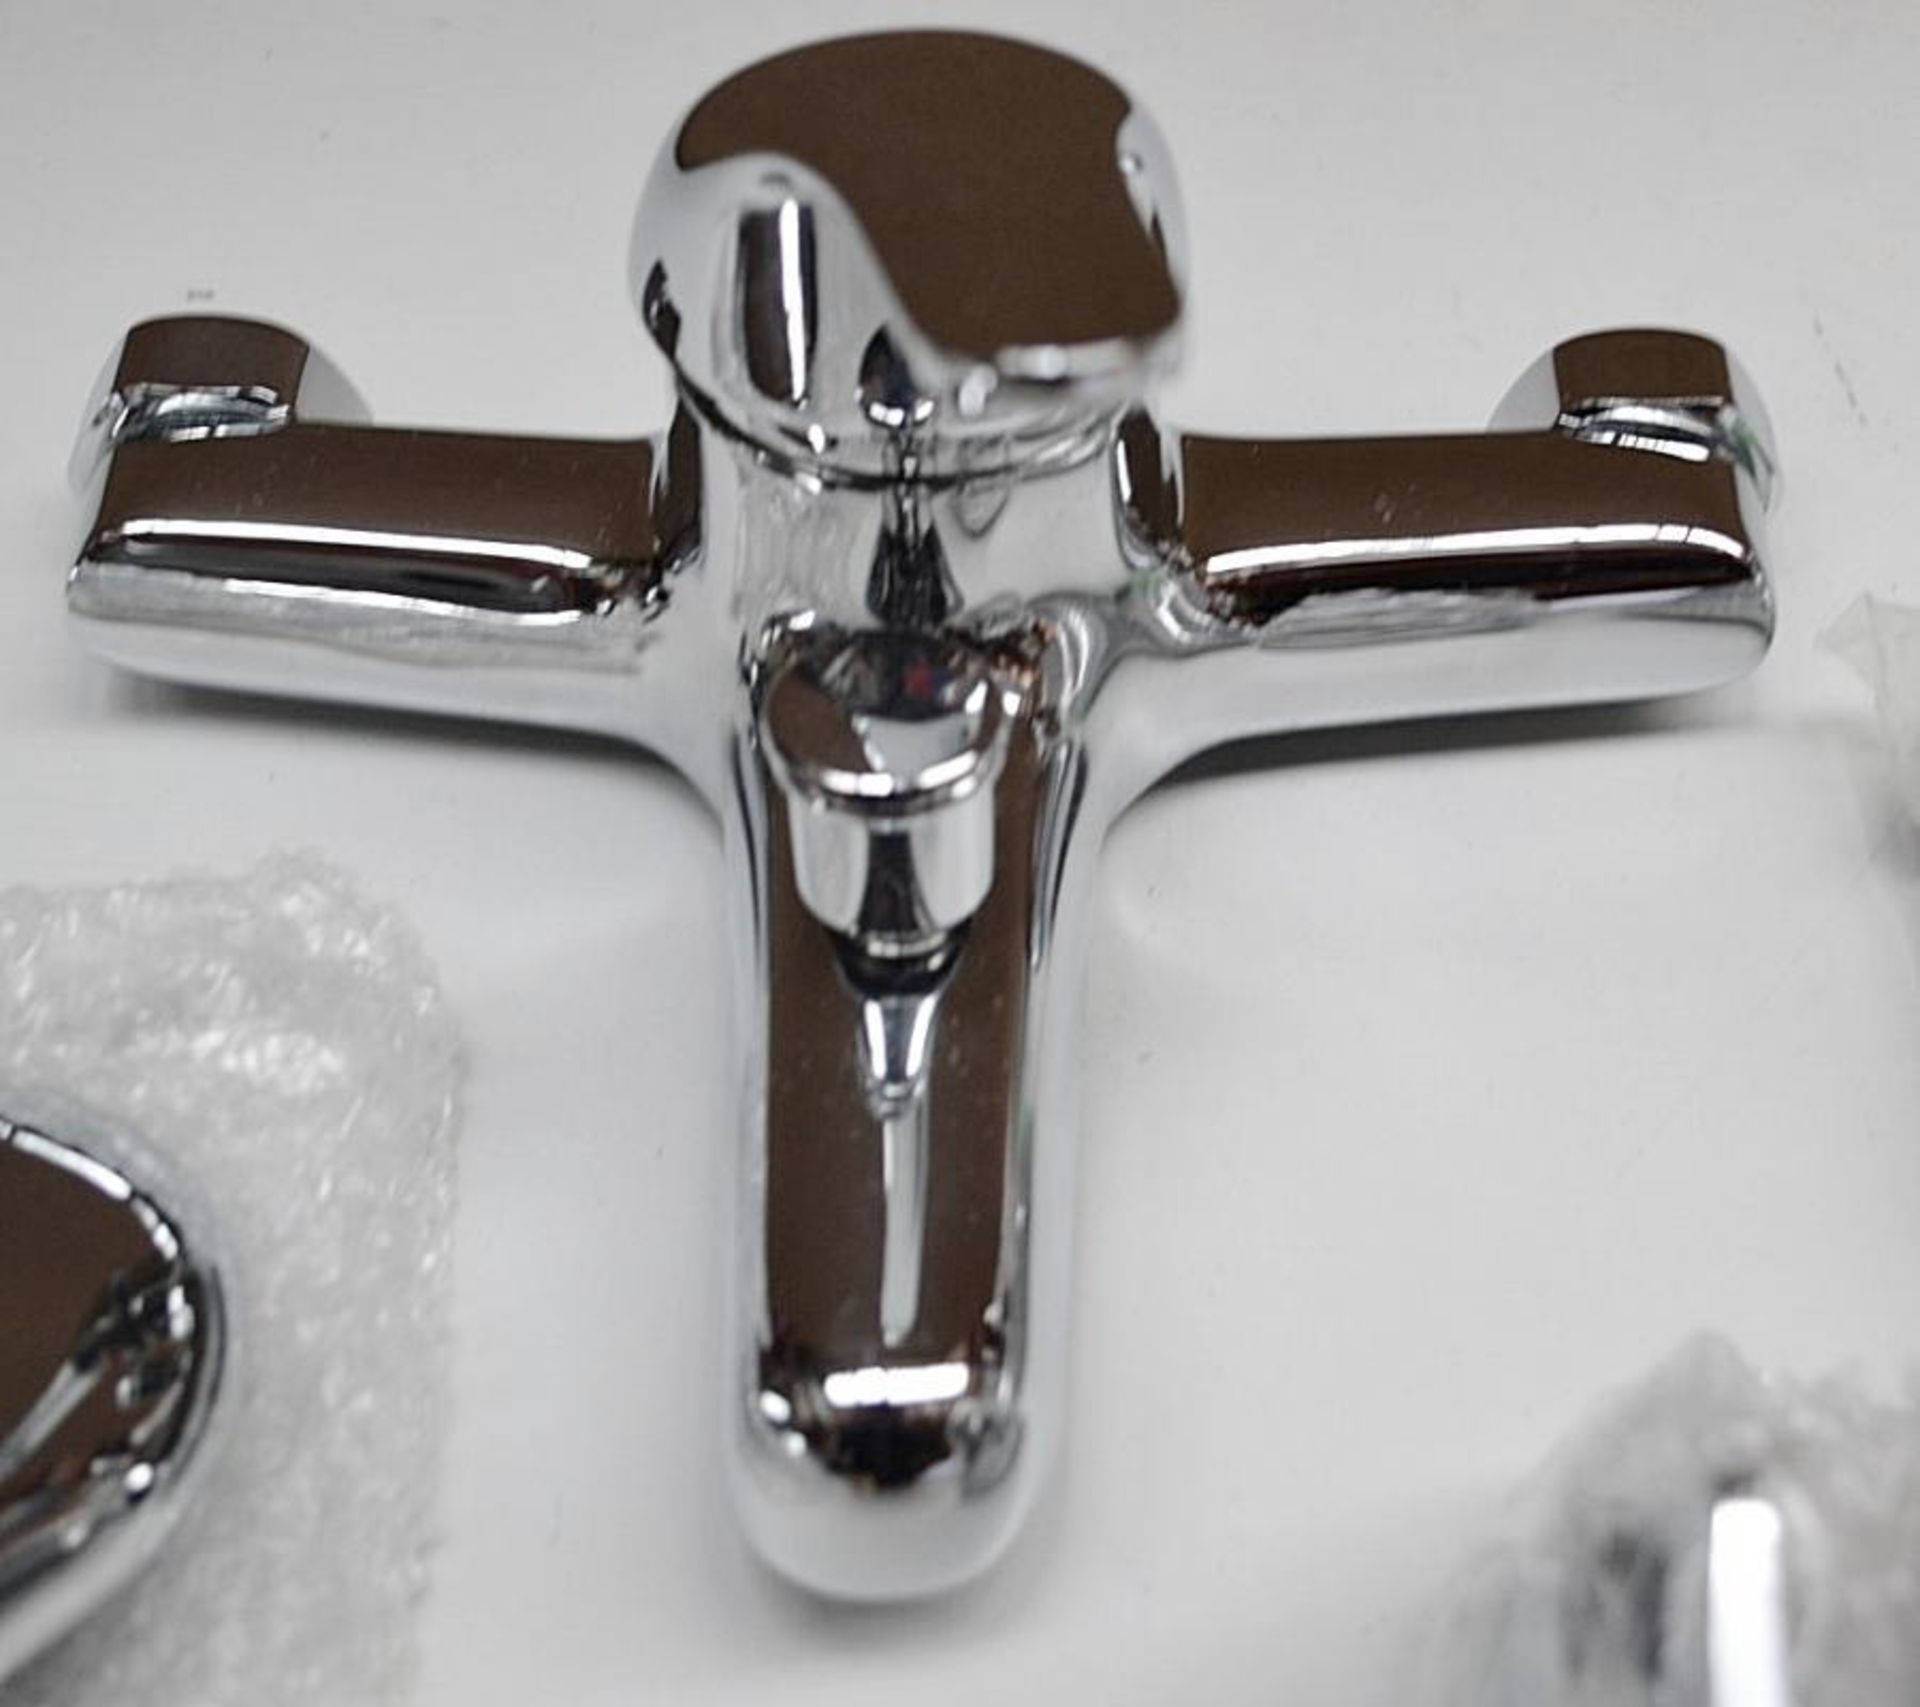 1 x PULSE Single Lever Bath Shower Mixer Tap In Chrome (Model: 112G2) - Ref: M188 - CL190 - Unused B - Image 2 of 7